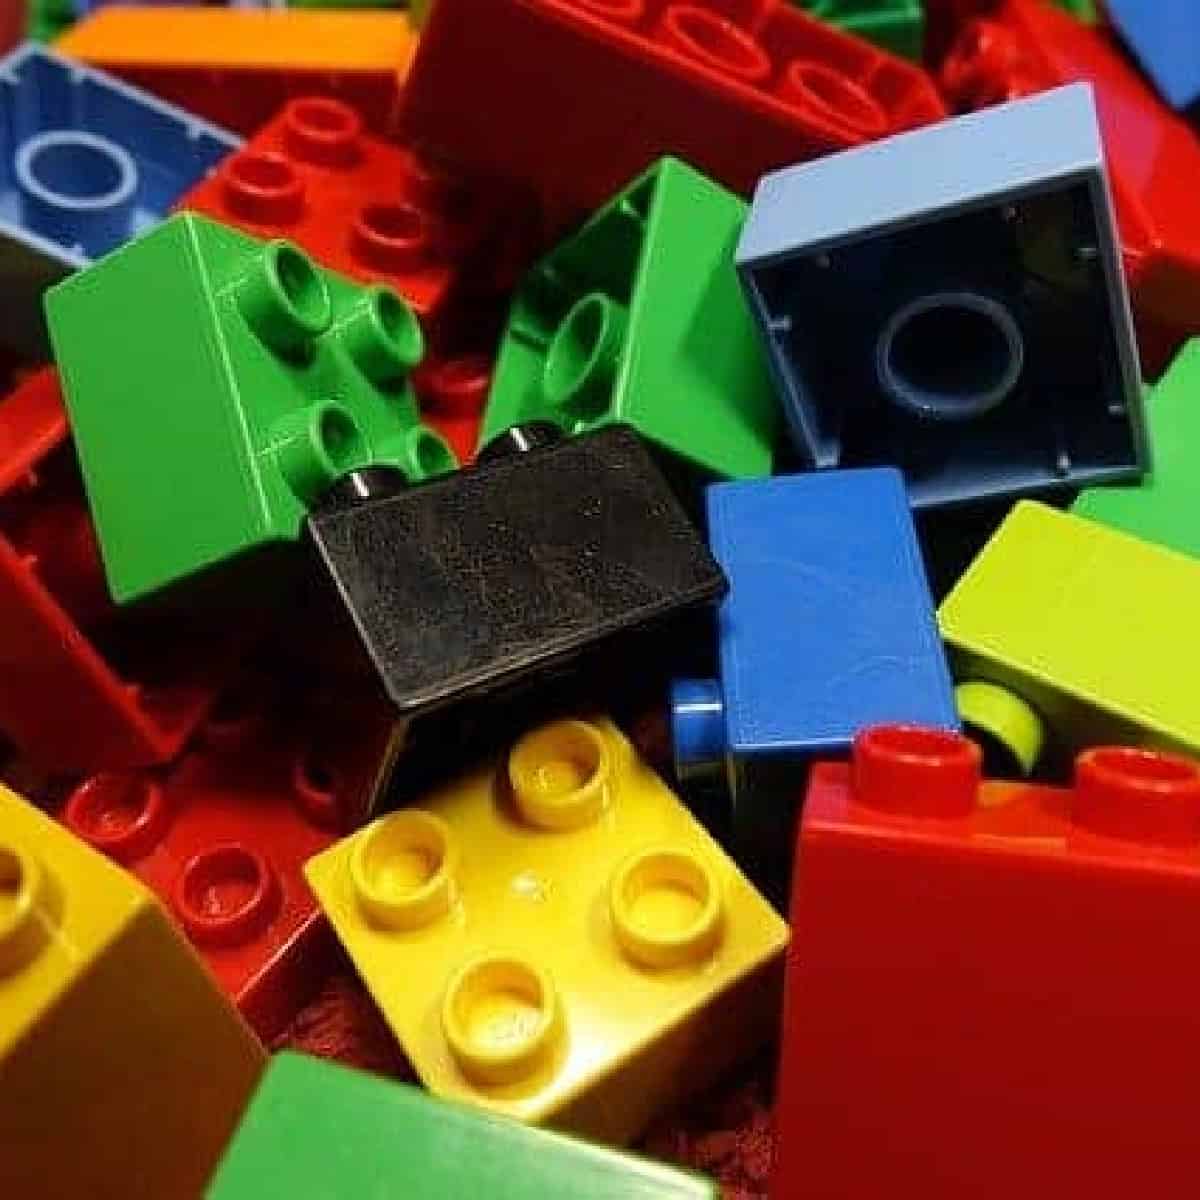 how to clean legos without chemicals.